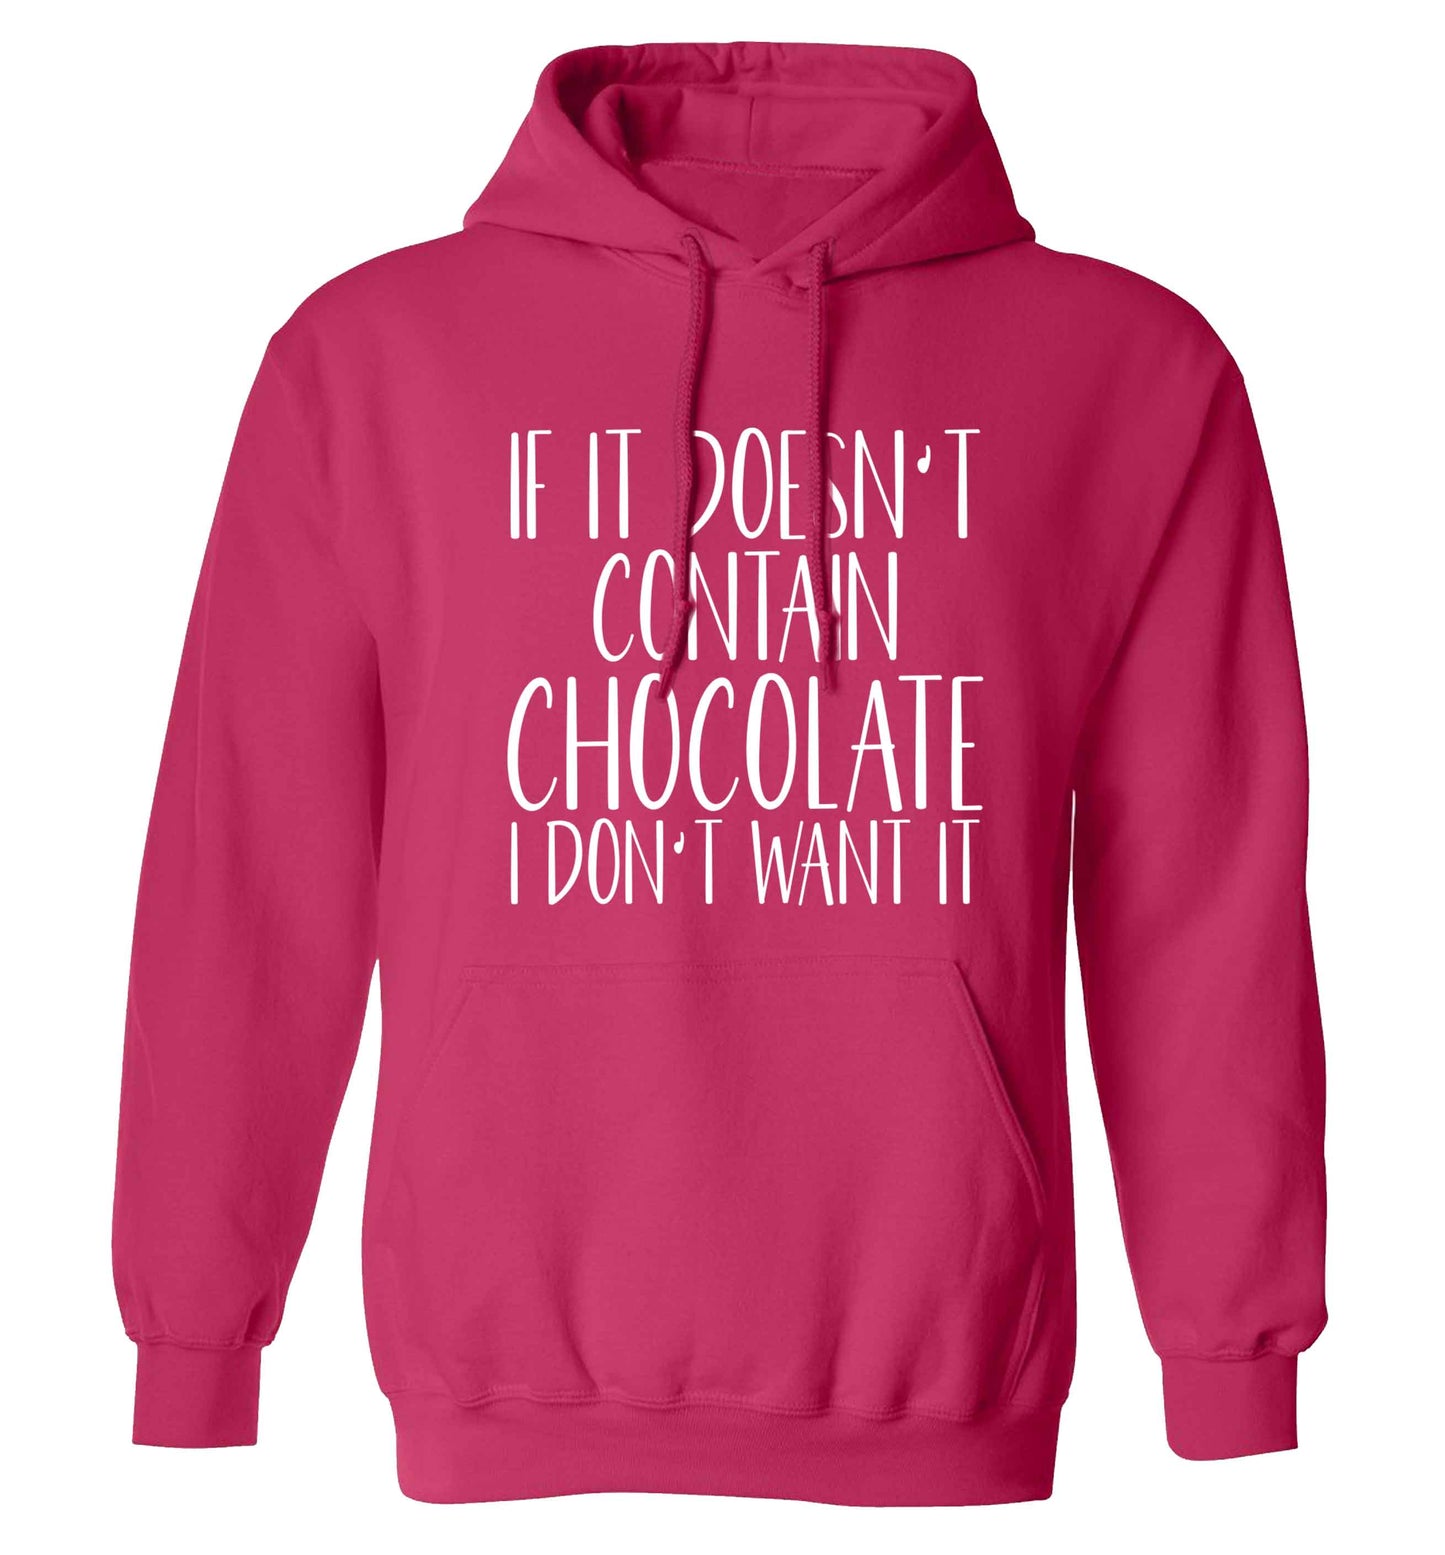 If it doesn't contain chocolate I don't want it adults unisex pink hoodie 2XL